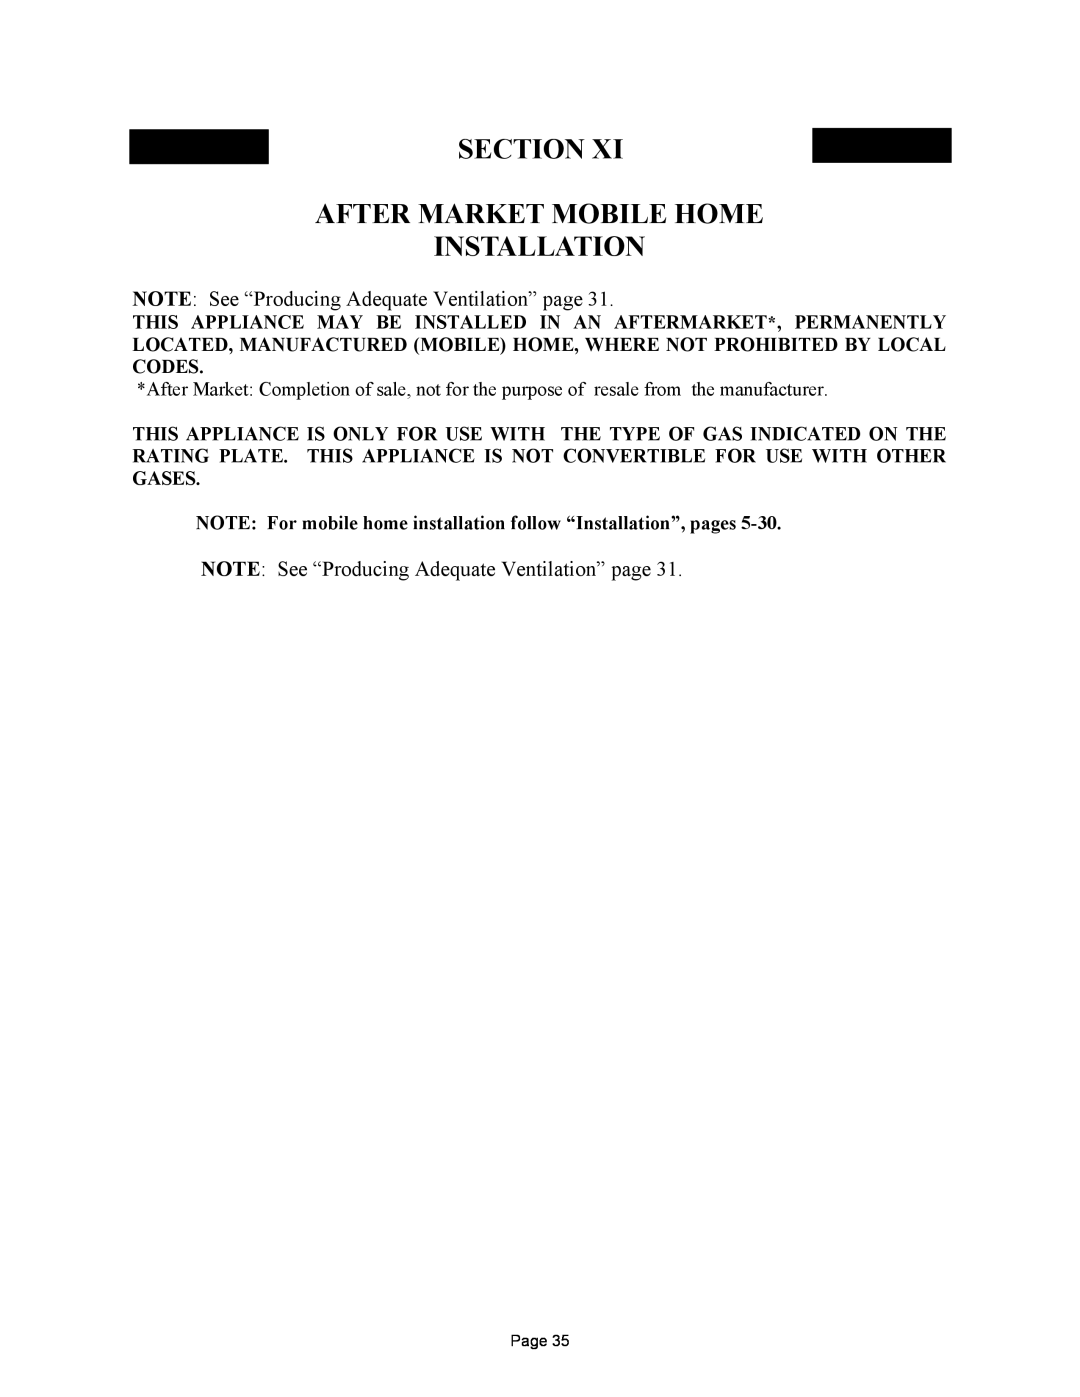 New Buck Corporation 384 manual Section After Market Mobile Home Installation 